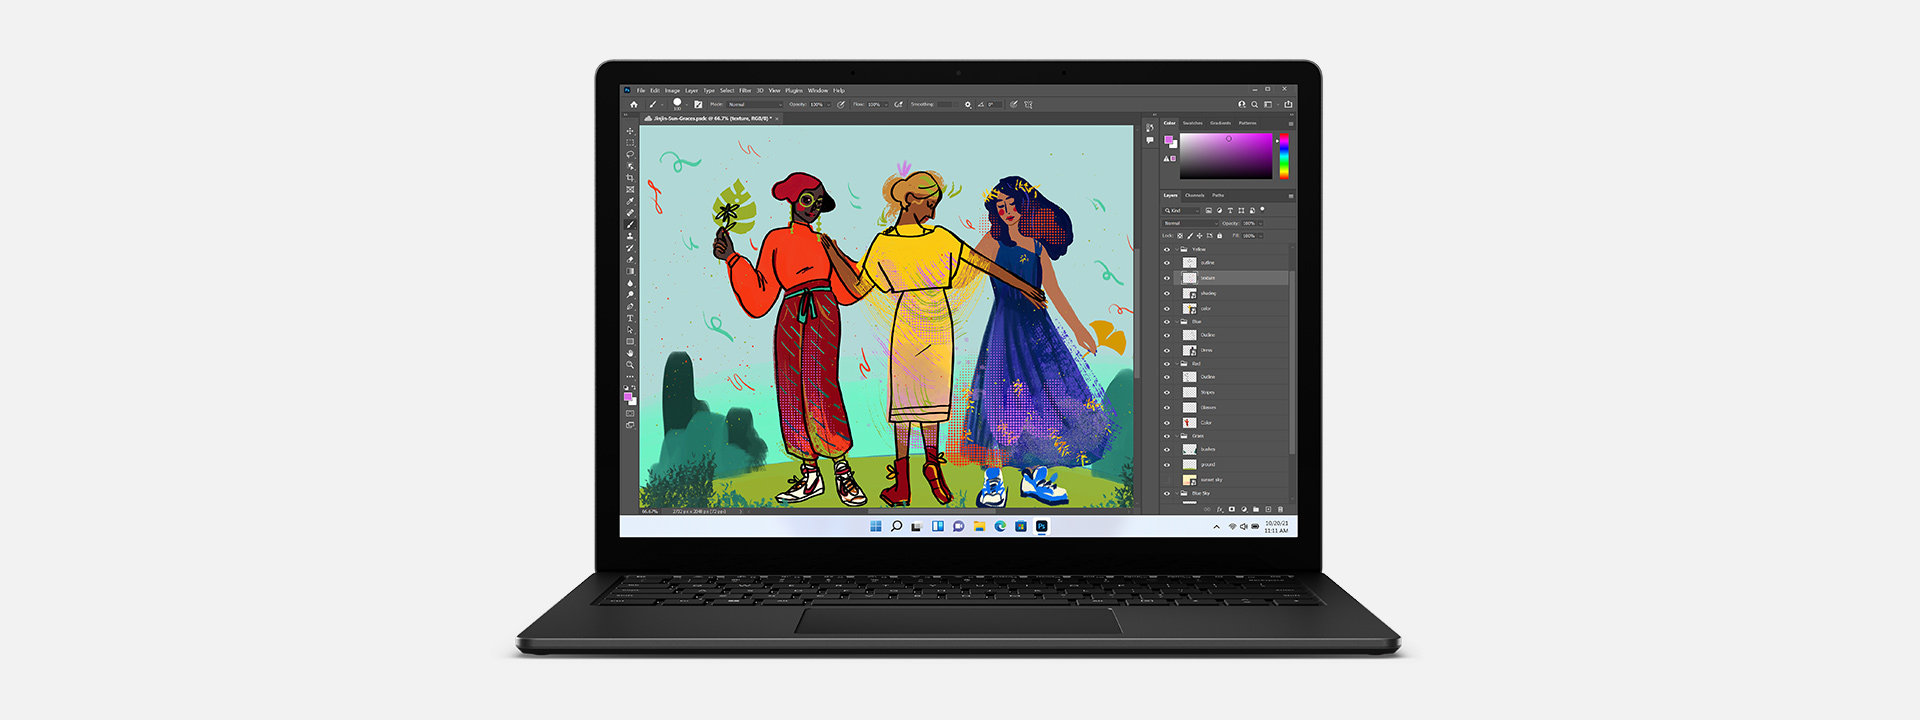 A Surface Laptop 4 with art displayed in Adobe Photoshop.